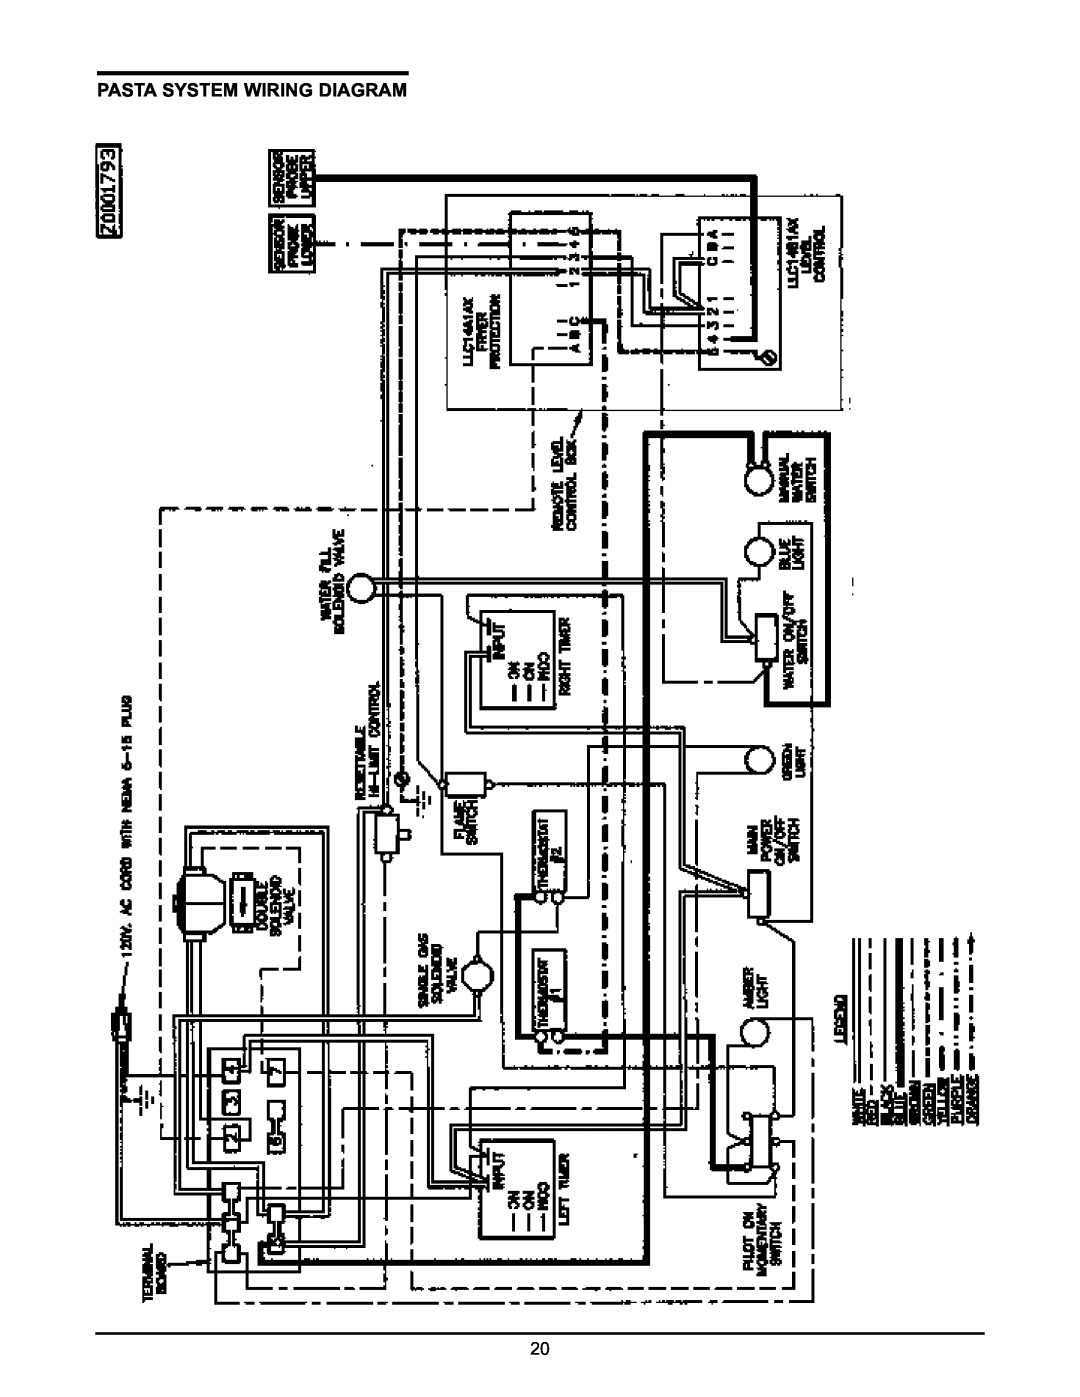 Keating Of Chicago 0107 service manual Pasta System Wiring Diagram 